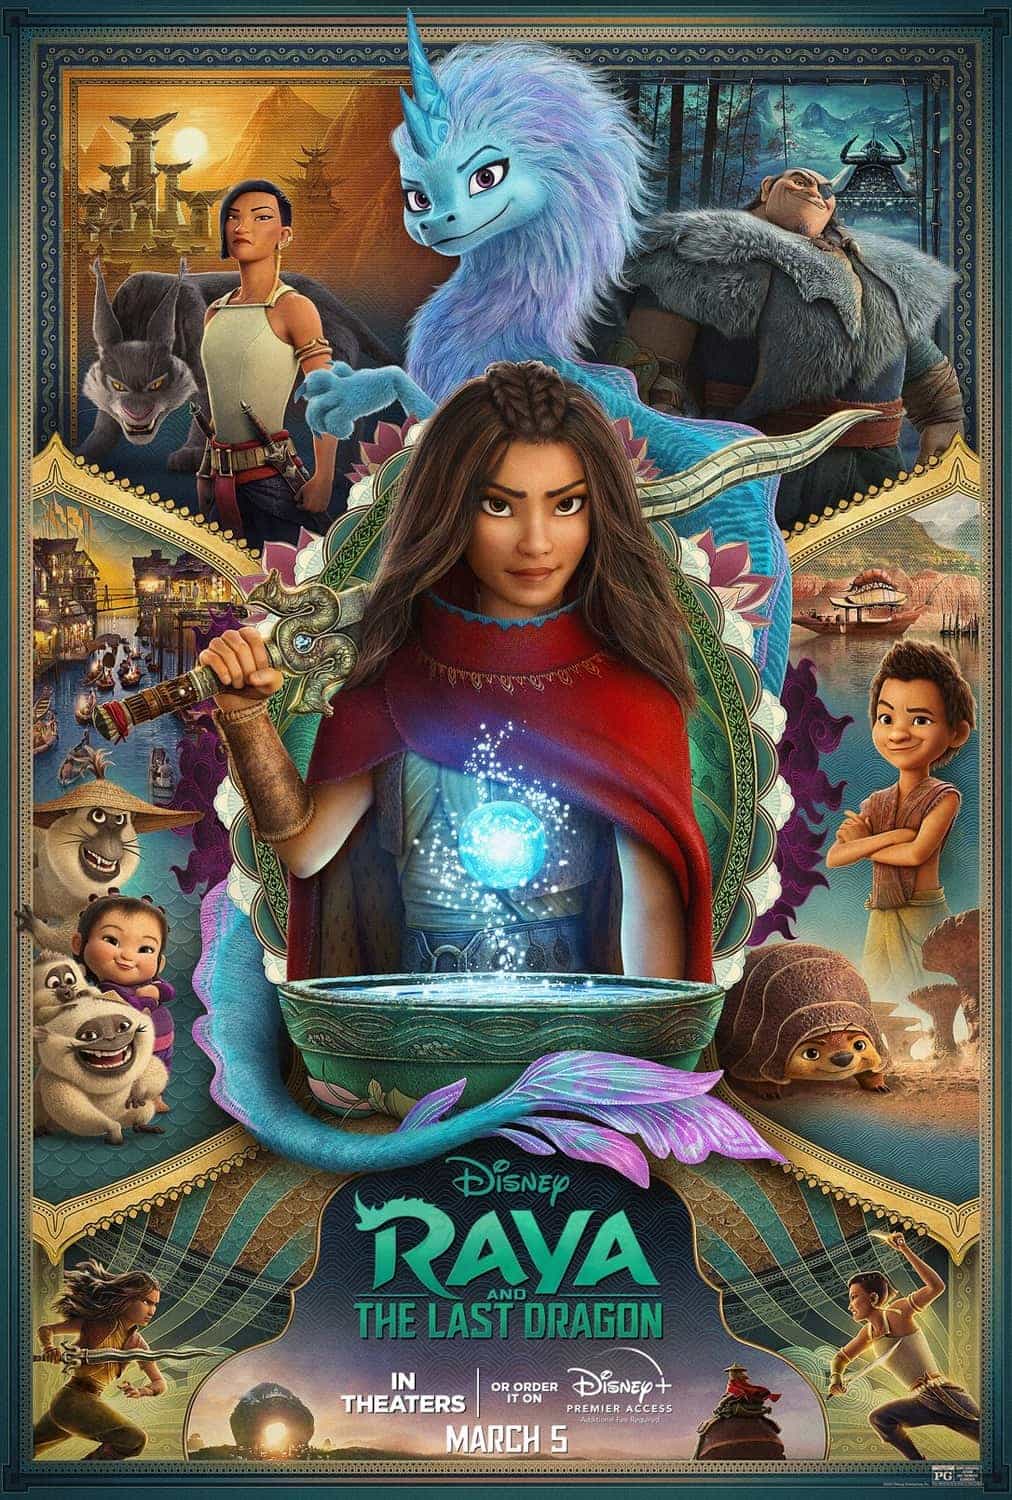 Disney will release Raya And The Last Dragon on Disney+ same day as theatres